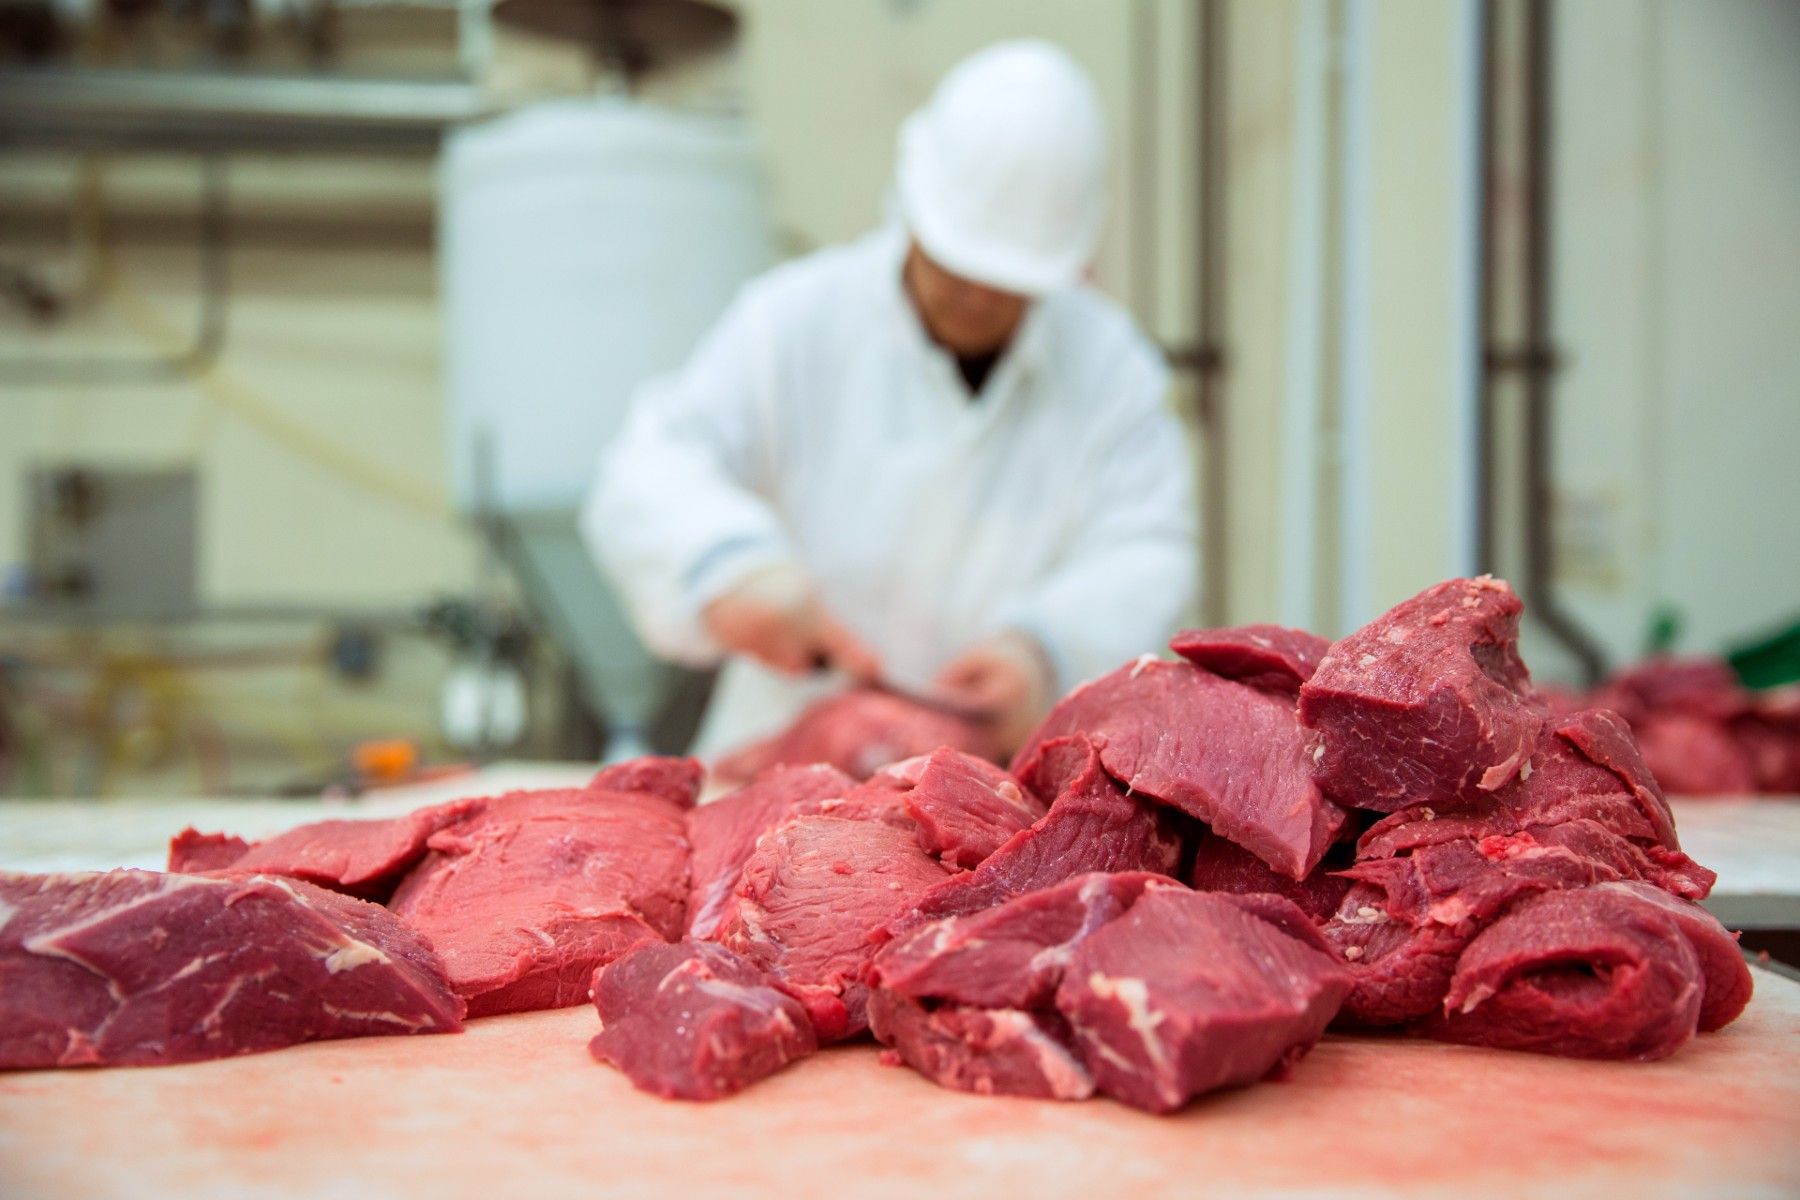 Man in hard hat and white coat in protective clothing processes meat at a meatpacking plant